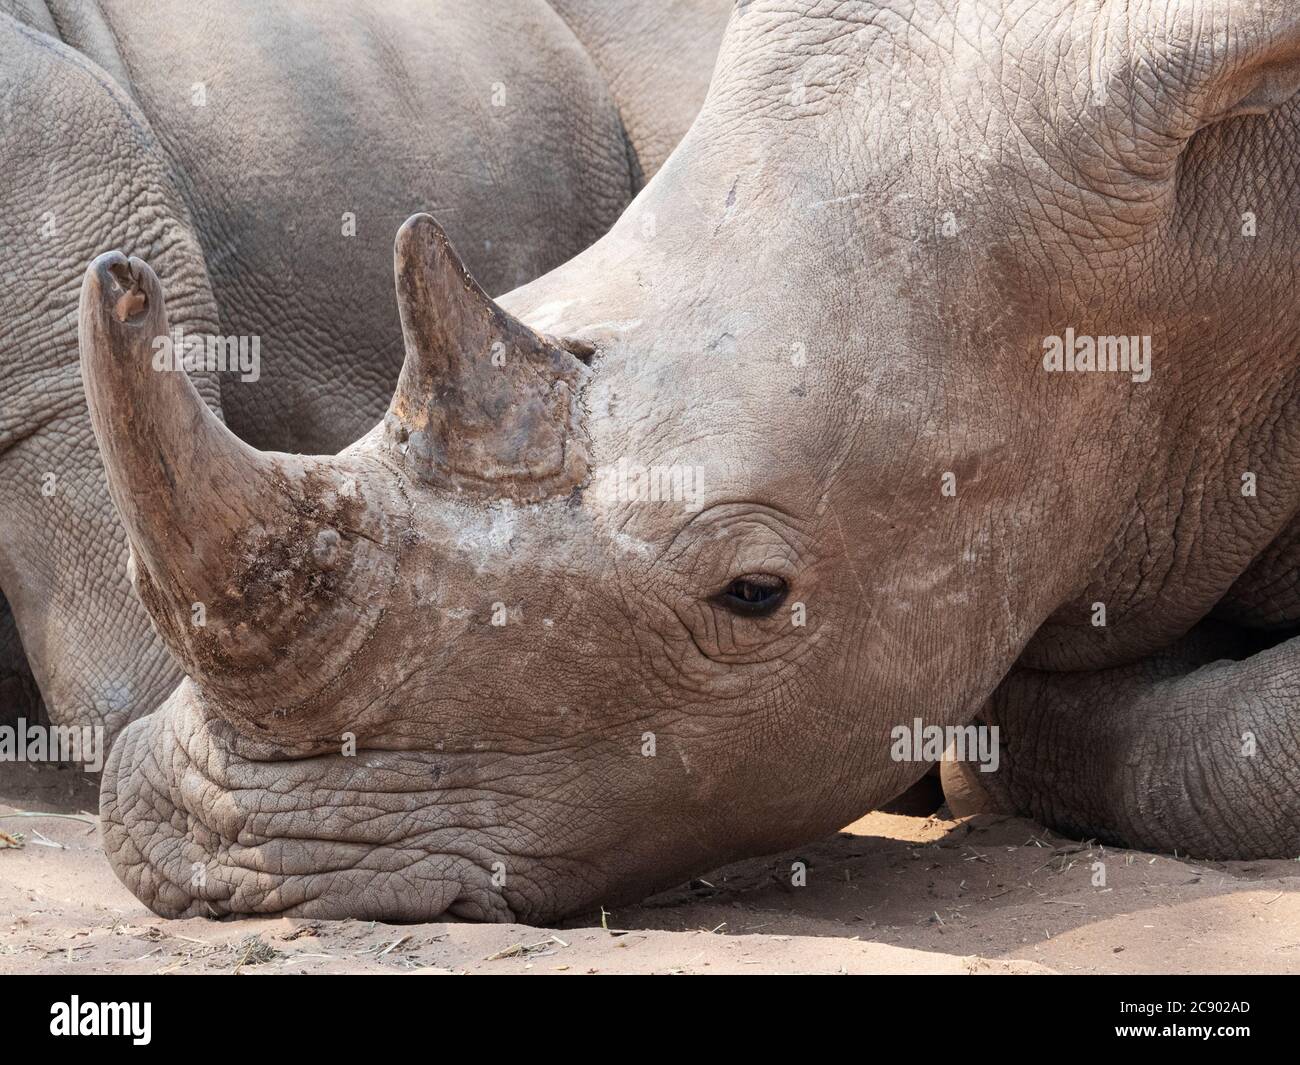 An adult southern white rhinoceros, Ceratotherium simum simum, guarded in Mosi-oa-Tunya National Park, Zambia. Stock Photo